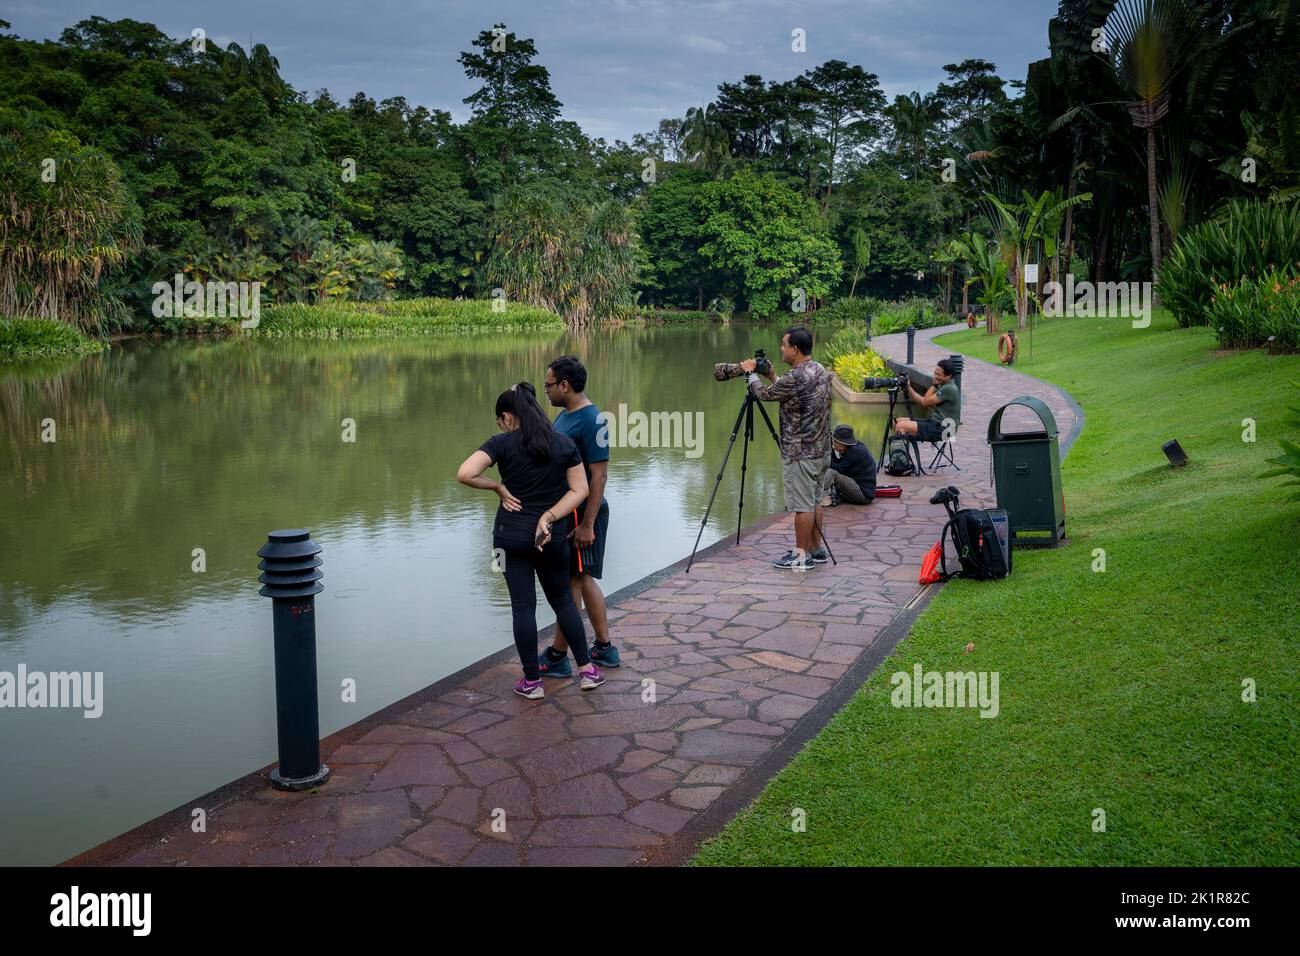 Visitors photographing birds at Symphony Lake in Singapore Botanic Gardens established in 1859 and covering 82 hectares. Stock Photo